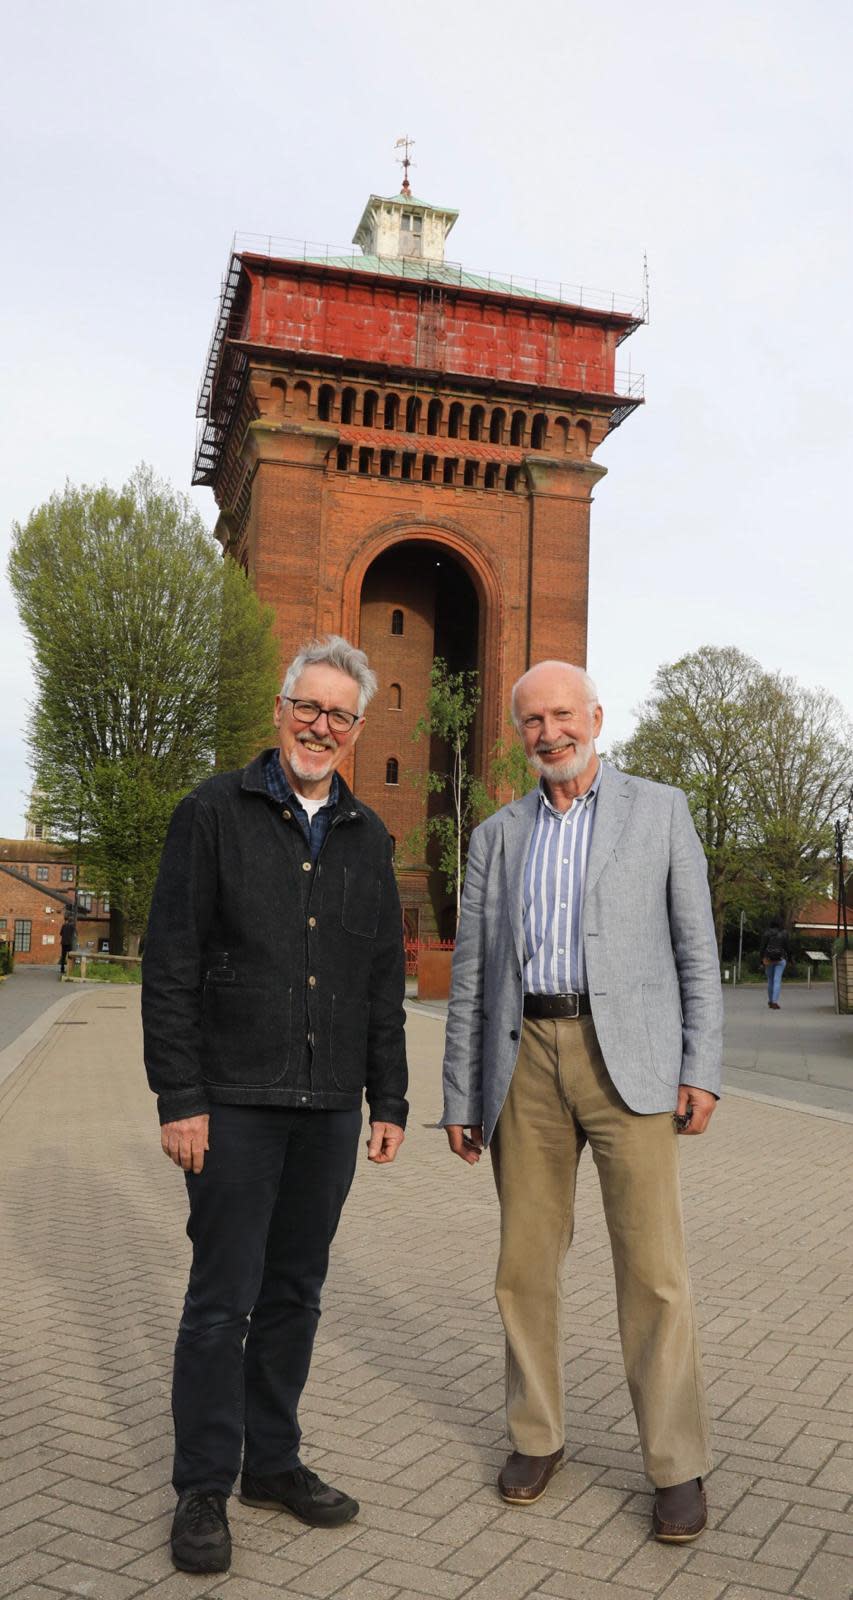 Gazette: Conservation - Griff Rhys Jones (Left) and Andrew Crayston (Right) who is a Trustee of North Essex Heritage